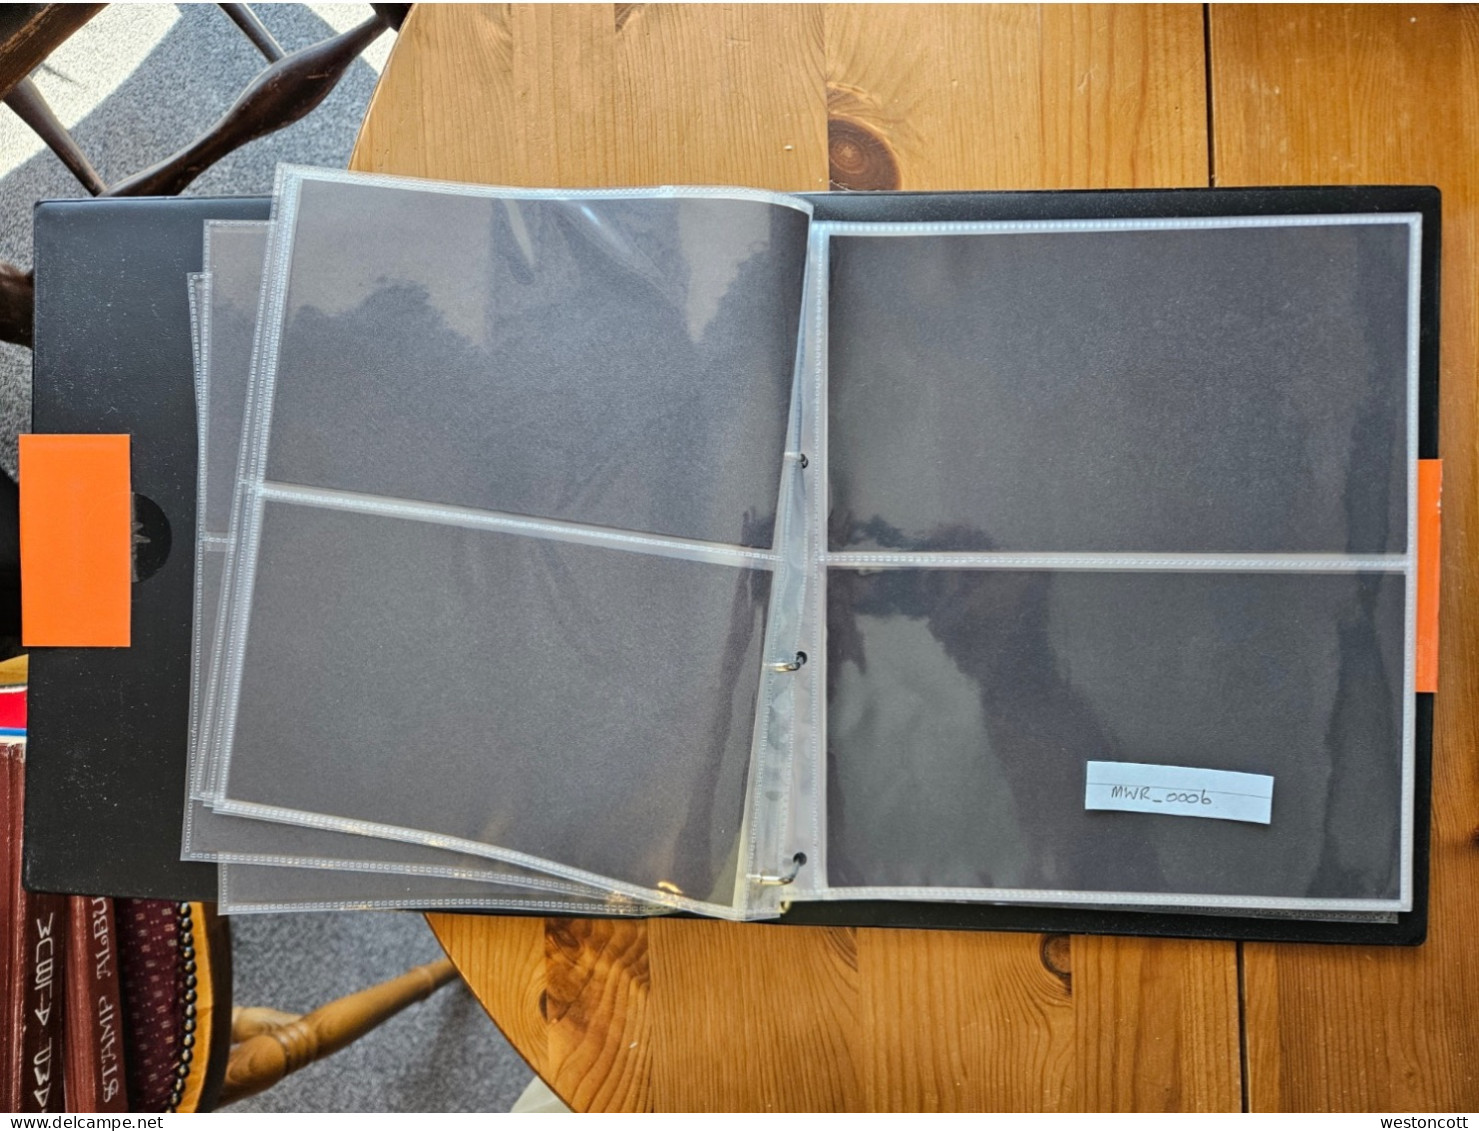 New Condition First Day Cover Album, 15 Pages, 30 Sides, 60 Pockets, BLACK - Komplettalben